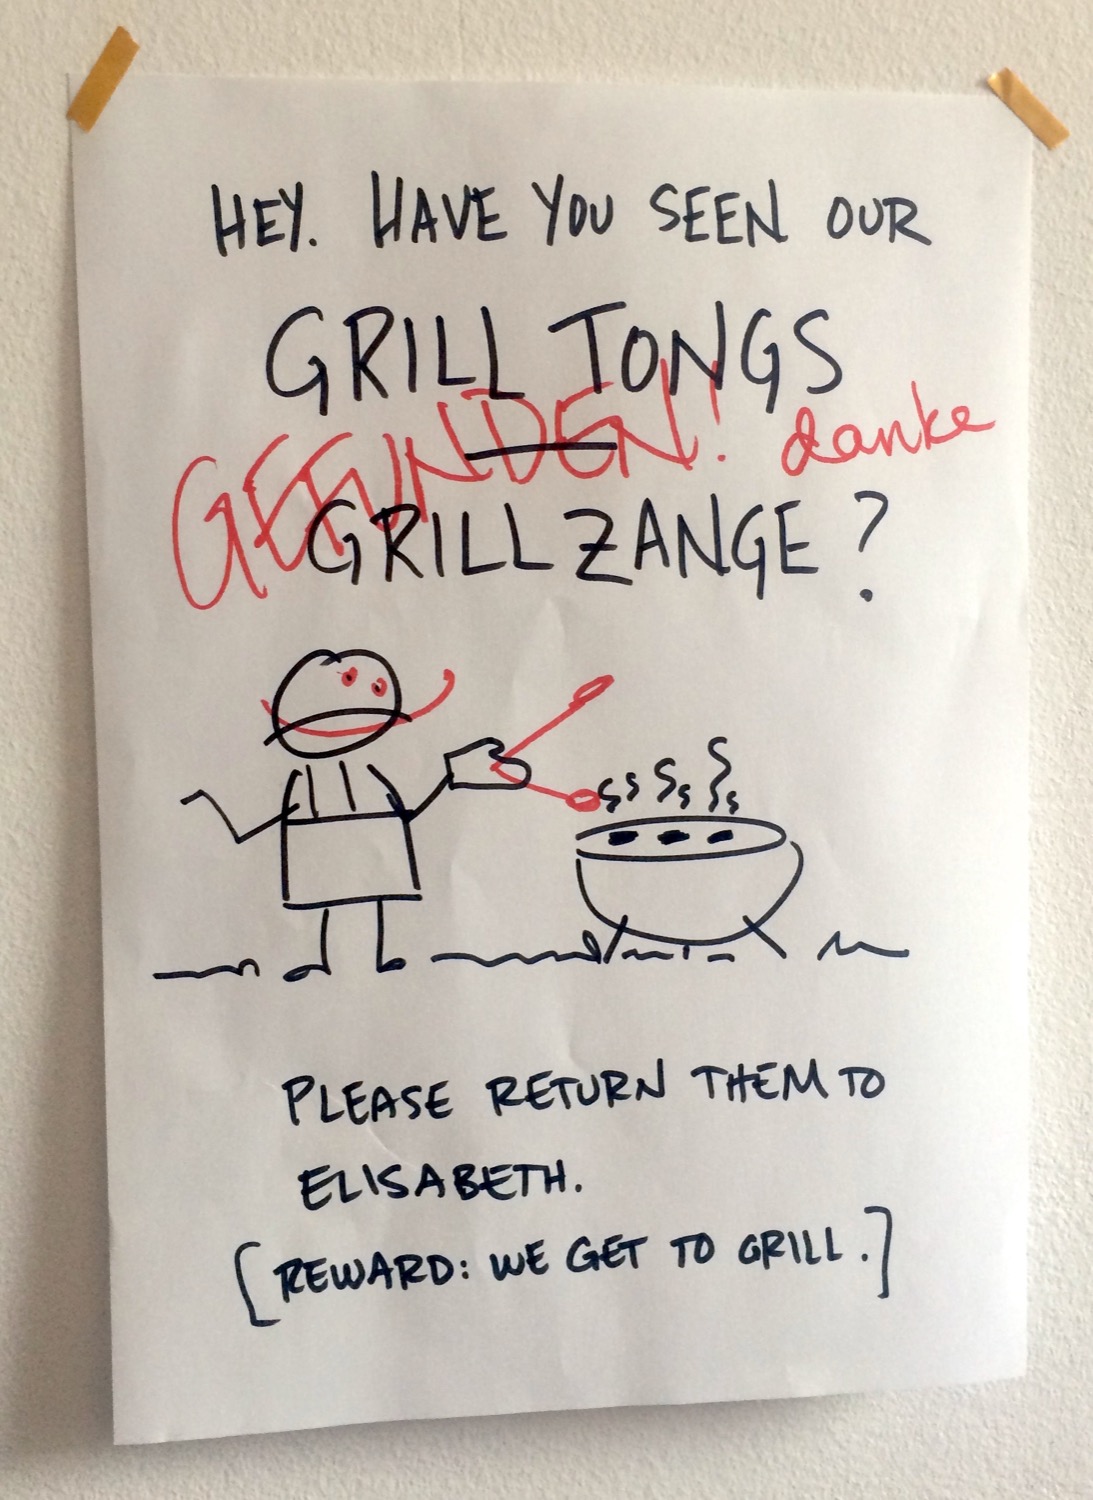 Poster for grill tongs